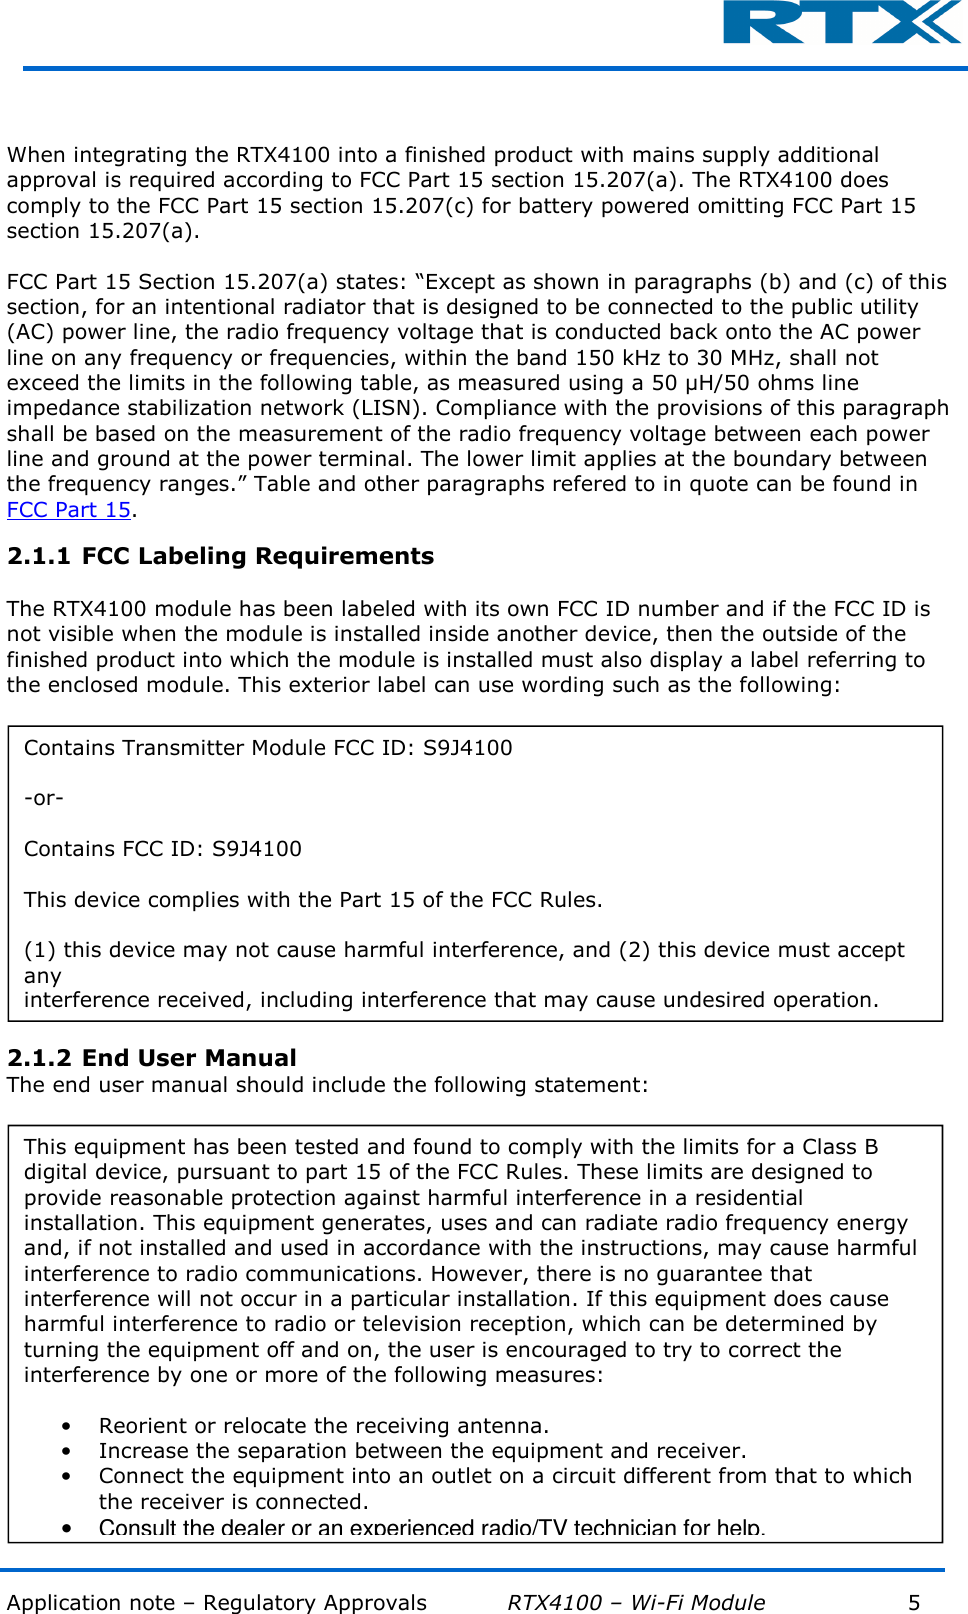  Application note – Regulatory Approvals           RTX4100 – Wi-Fi Module            5          When integrating the RTX4100 into a finished product with mains supply additional approval is required according to FCC Part 15 section 15.207(a). The RTX4100 does comply to the FCC Part 15 section 15.207(c) for battery powered omitting FCC Part 15 section 15.207(a).  FCC Part 15 Section 15.207(a) states: “Except as shown in paragraphs (b) and (c) of this section, for an intentional radiator that is designed to be connected to the public utility (AC) power line, the radio frequency voltage that is conducted back onto the AC power line on any frequency or frequencies, within the band 150 kHz to 30 MHz, shall not exceed the limits in the following table, as measured using a 50 µH/50 ohms line impedance stabilization network (LISN). Compliance with the provisions of this paragraph shall be based on the measurement of the radio frequency voltage between each power line and ground at the power terminal. The lower limit applies at the boundary between the frequency ranges.” Table and other paragraphs refered to in quote can be found in FCC Part 15. 2.1.1 FCC Labeling Requirements  The RTX4100 module has been labeled with its own FCC ID number and if the FCC ID is not visible when the module is installed inside another device, then the outside of the finished product into which the module is installed must also display a label referring to the enclosed module. This exterior label can use wording such as the following:  2.1.2 End User Manual The end user manual should include the following statement:  Contains Transmitter Module FCC ID: S9J4100  -or-  Contains FCC ID: S9J4100  This device complies with the Part 15 of the FCC Rules.  (1) this device may not cause harmful interference, and (2) this device must accept any interference received, including interference that may cause undesired operation. This equipment has been tested and found to comply with the limits for a Class B digital device, pursuant to part 15 of the FCC Rules. These limits are designed to provide reasonable protection against harmful interference in a residential installation. This equipment generates, uses and can radiate radio frequency energy and, if not installed and used in accordance with the instructions, may cause harmful interference to radio communications. However, there is no guarantee that interference will not occur in a particular installation. If this equipment does cause harmful interference to radio or television reception, which can be determined by turning the equipment off and on, the user is encouraged to try to correct the interference by one or more of the following measures:  •Reorient or relocate the receiving antenna. •Increase the separation between the equipment and receiver. •Connect the equipment into an outlet on a circuit different from that to which the receiver is connected. •Consult the dealer or an experienced radio/TV technician for help. 